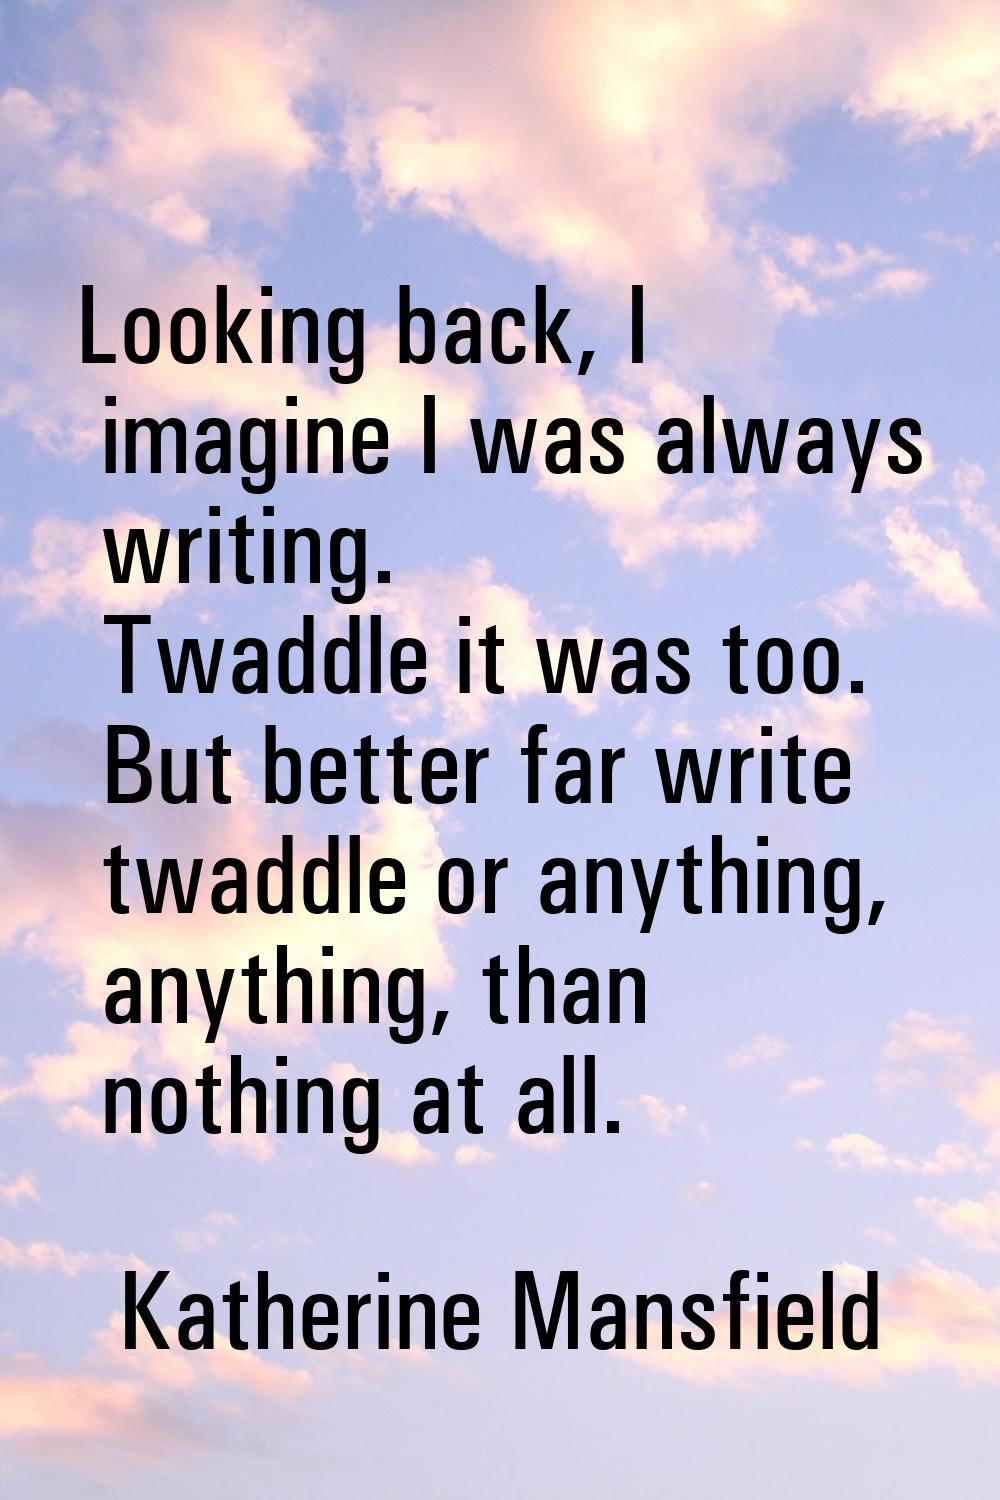 Looking back, I imagine I was always writing. Twaddle it was too. But better far write twaddle or a